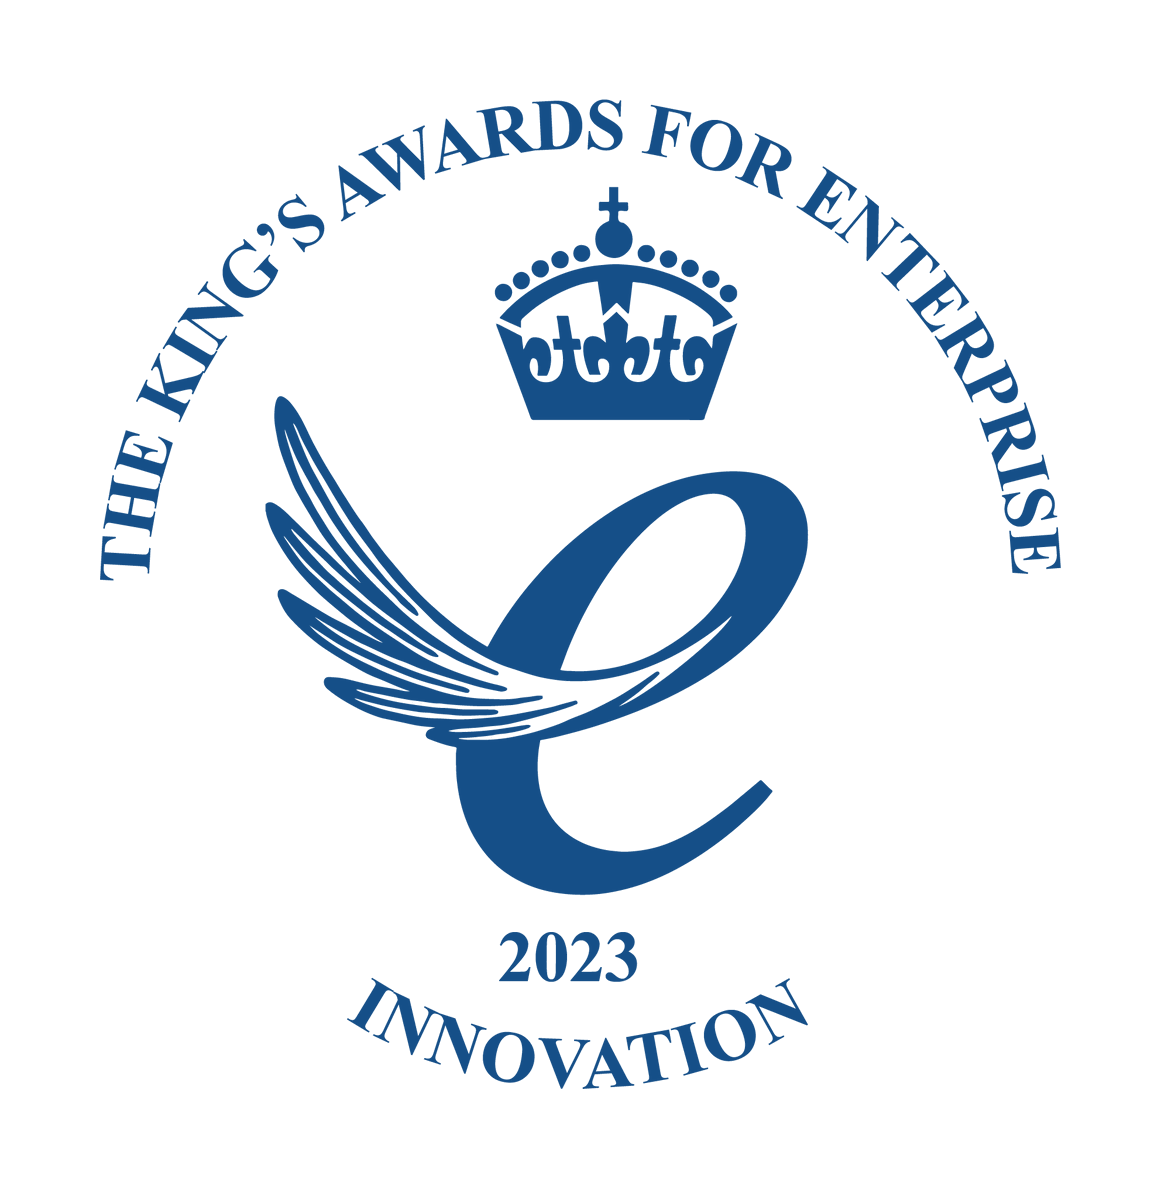 We are thrilled to announce that Archaeological Research Services Ltd has won a King’s Award for Enterprise!

#kingsawards #archaeology #geochemicalsurvey #uavdrone #geoarchaeology #carbonfootprintreduction #archaeologyuk #constructionindustry #developers #healthandsafety